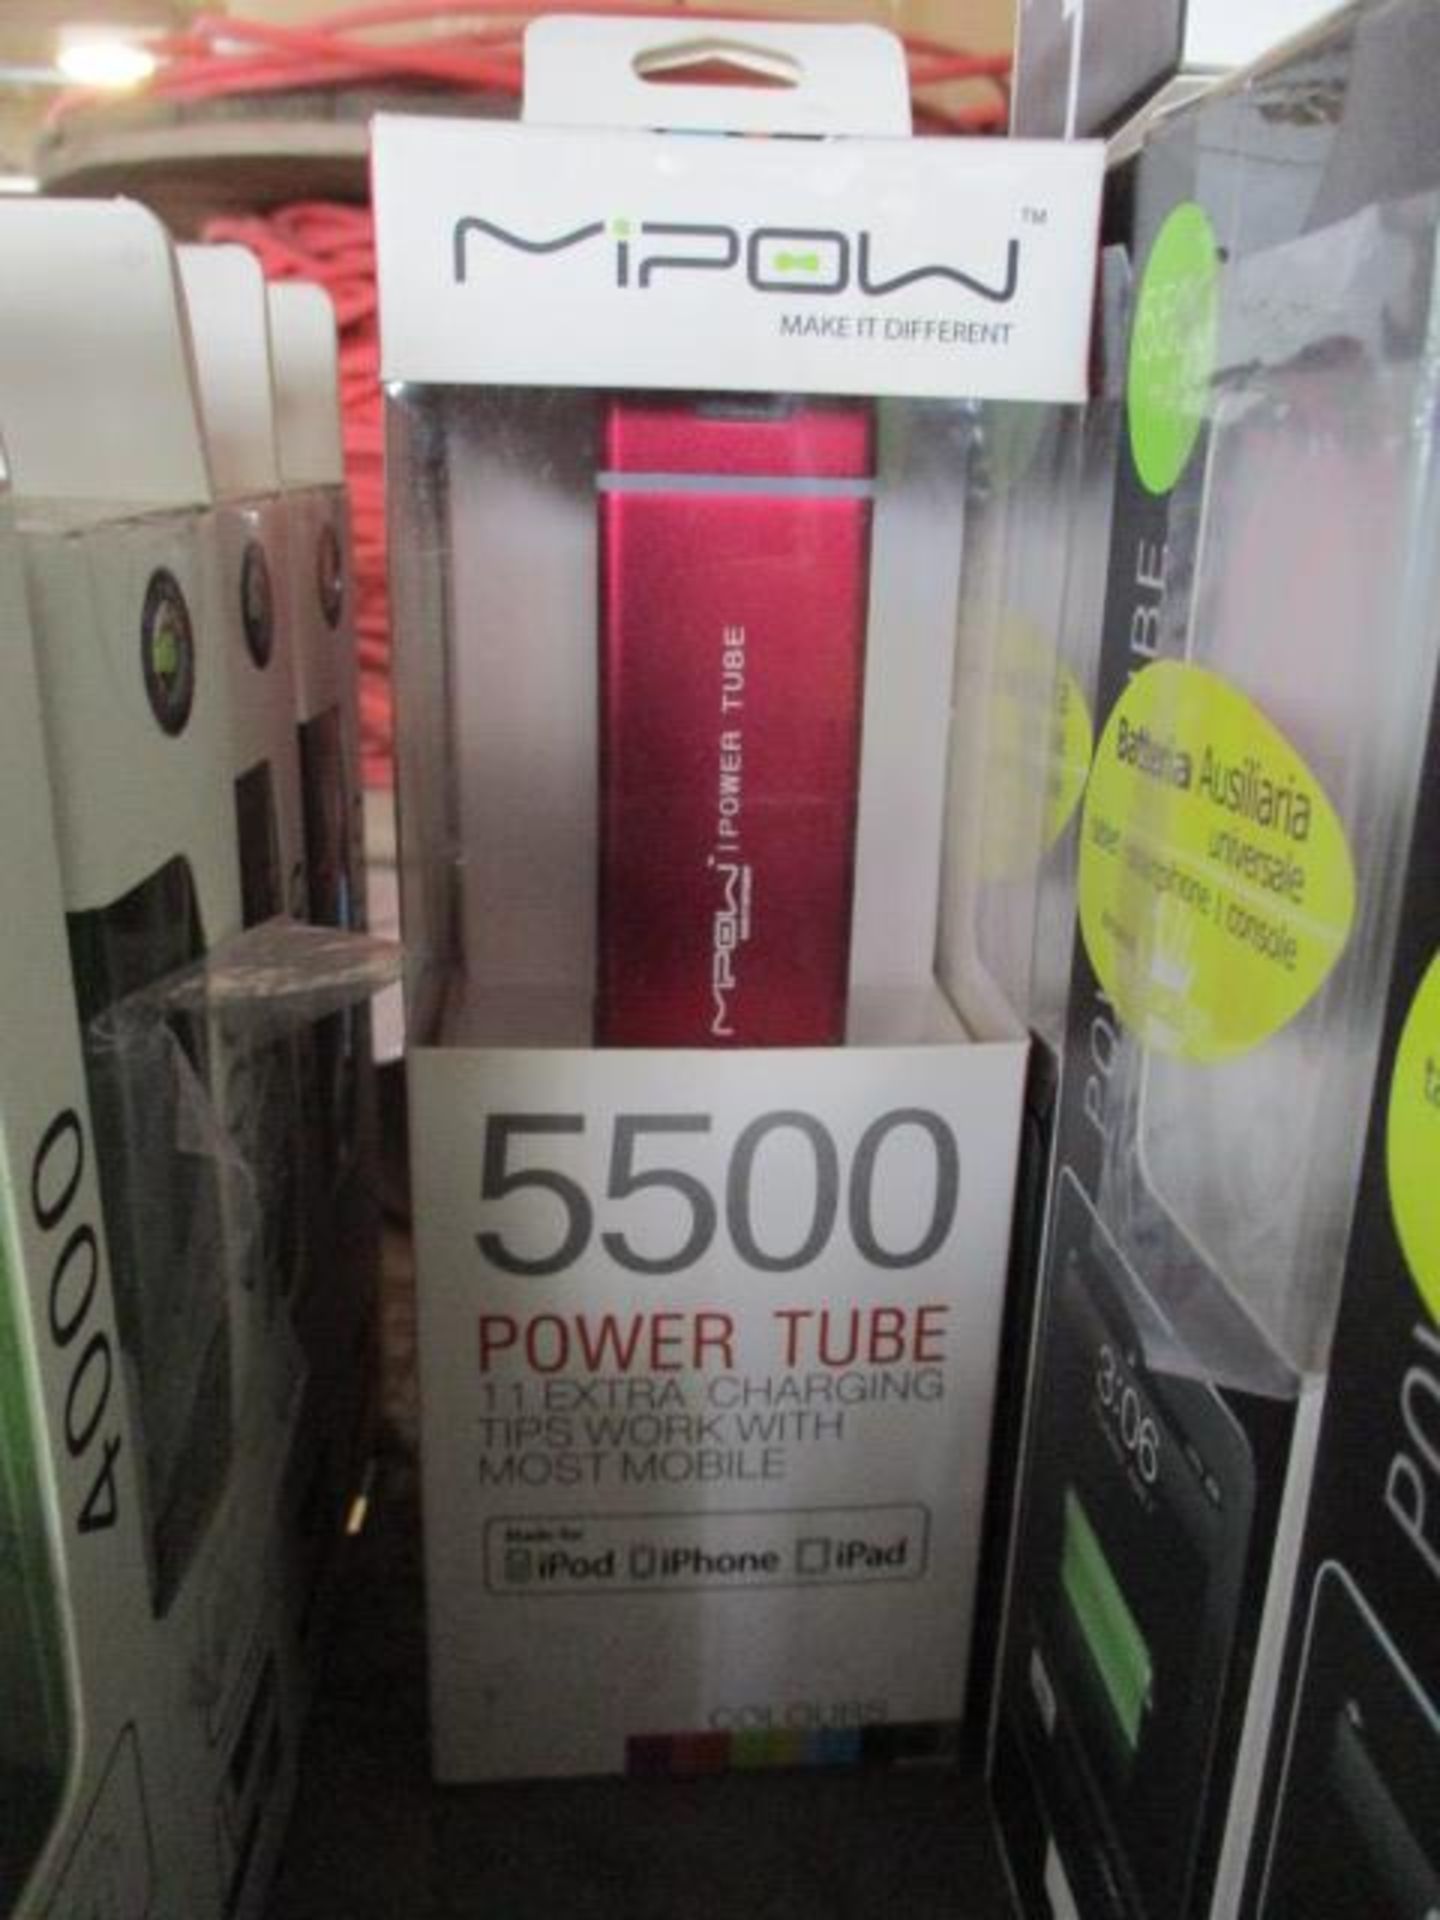 MiPow 5500Mah Power Tube recharger unit - Premium quality new and unused - rrp £59 + - comes comple